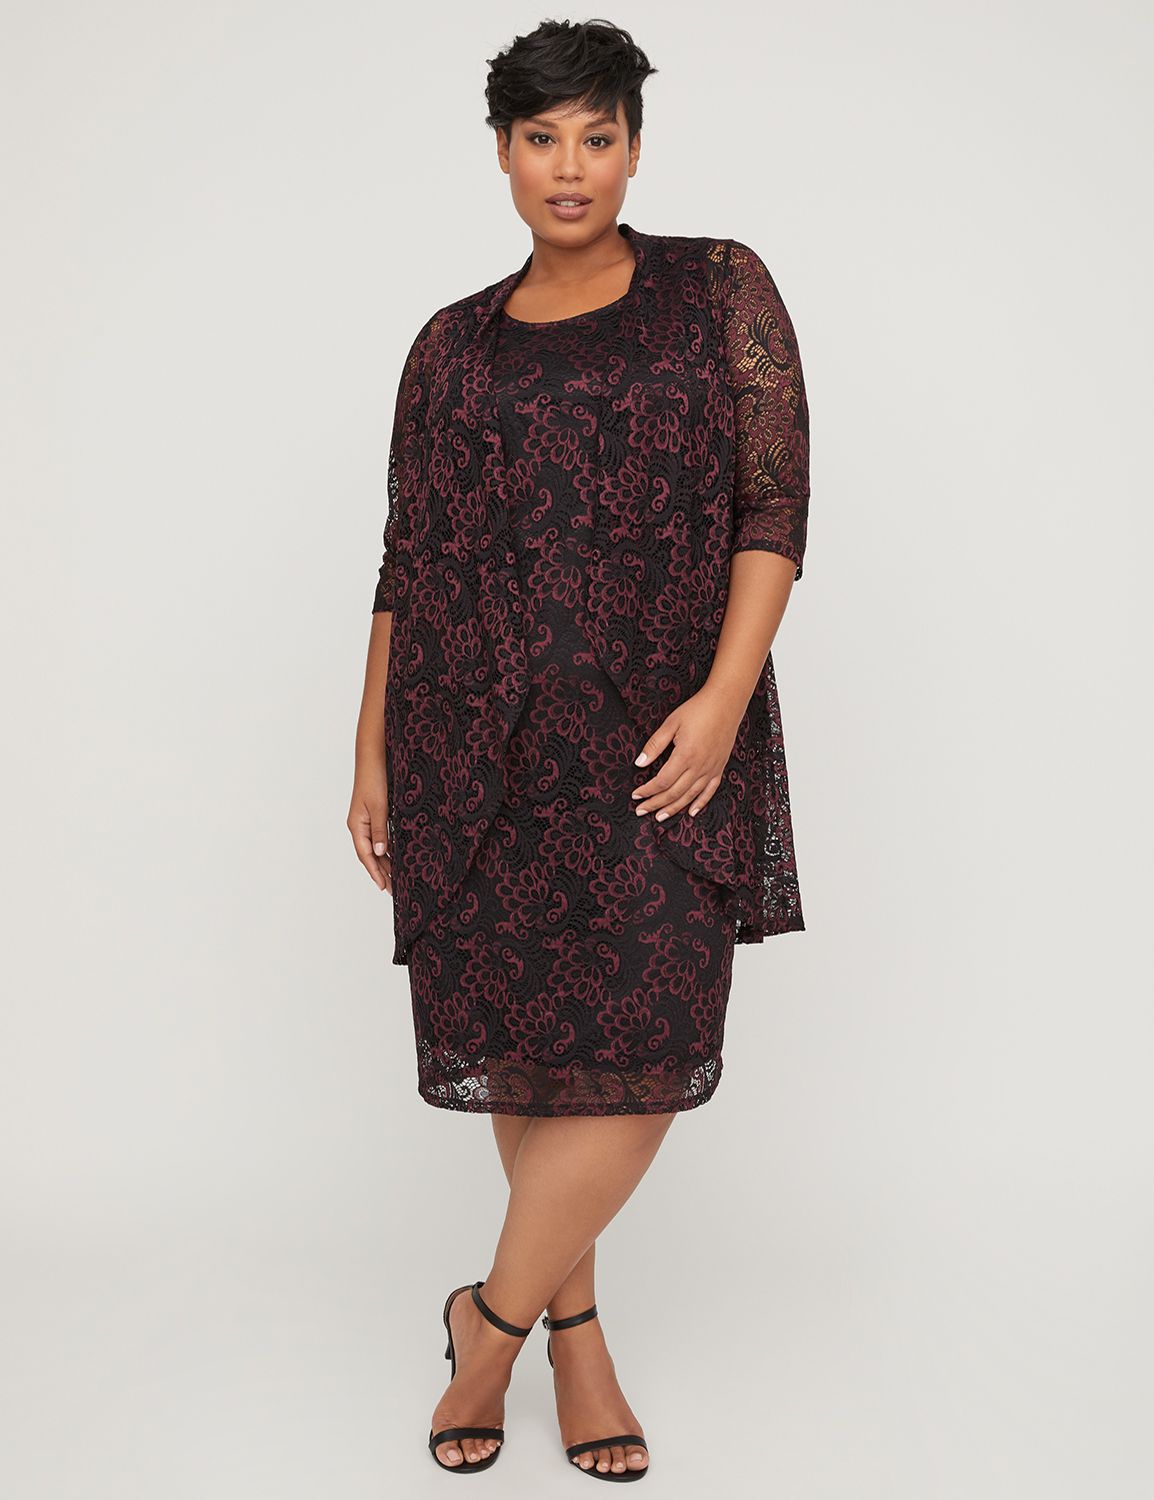 A stunning jacket dress in all-over lace offering an elegant addition to your wardrobe. Dress: Scoop neck. Sleeveless. Covered elastic detail at back waist for a flattering fit. No closure for easy, pull-on styling. Fully lined. Midi length. Jacket: All-over sheer lace. Open front with a cascading drape. Three-quarter sleeves. FIT: The jacket dress is a 2-piece set featuring a perfectly coordinated dress and jacket. This bestselling combo can be worn together or separately and paired with other wardrobe pieces. Item Number #316061, 68% Nylon/22% Polyester/10% Spandex Lace, Machine Wash, Imported Plus Size Dress, Length: 42" , Plus Sizes 0X-5X, Catherines